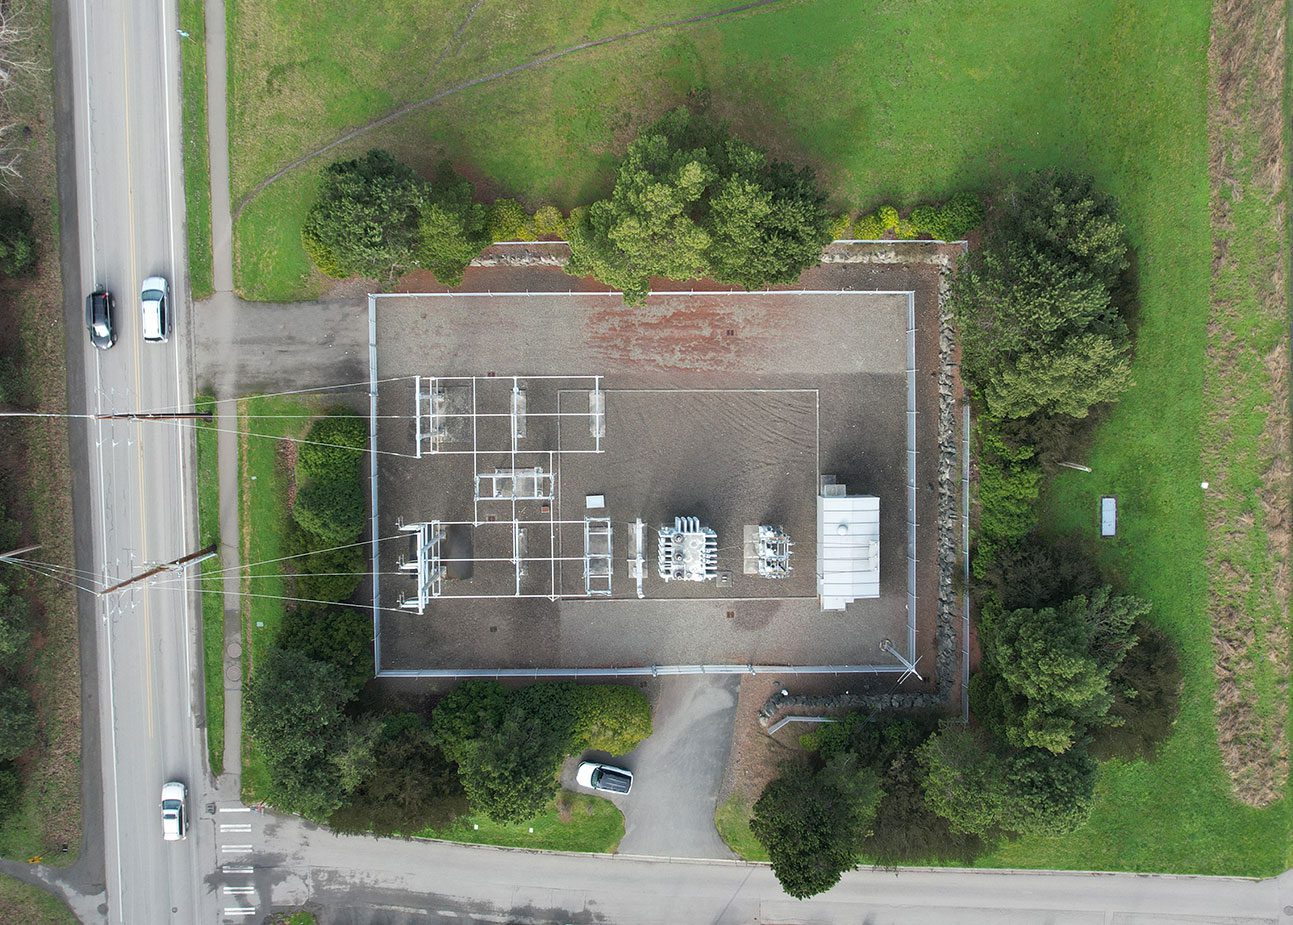 Overhead view from above of there Dana Roberts substation in Port Townsend.